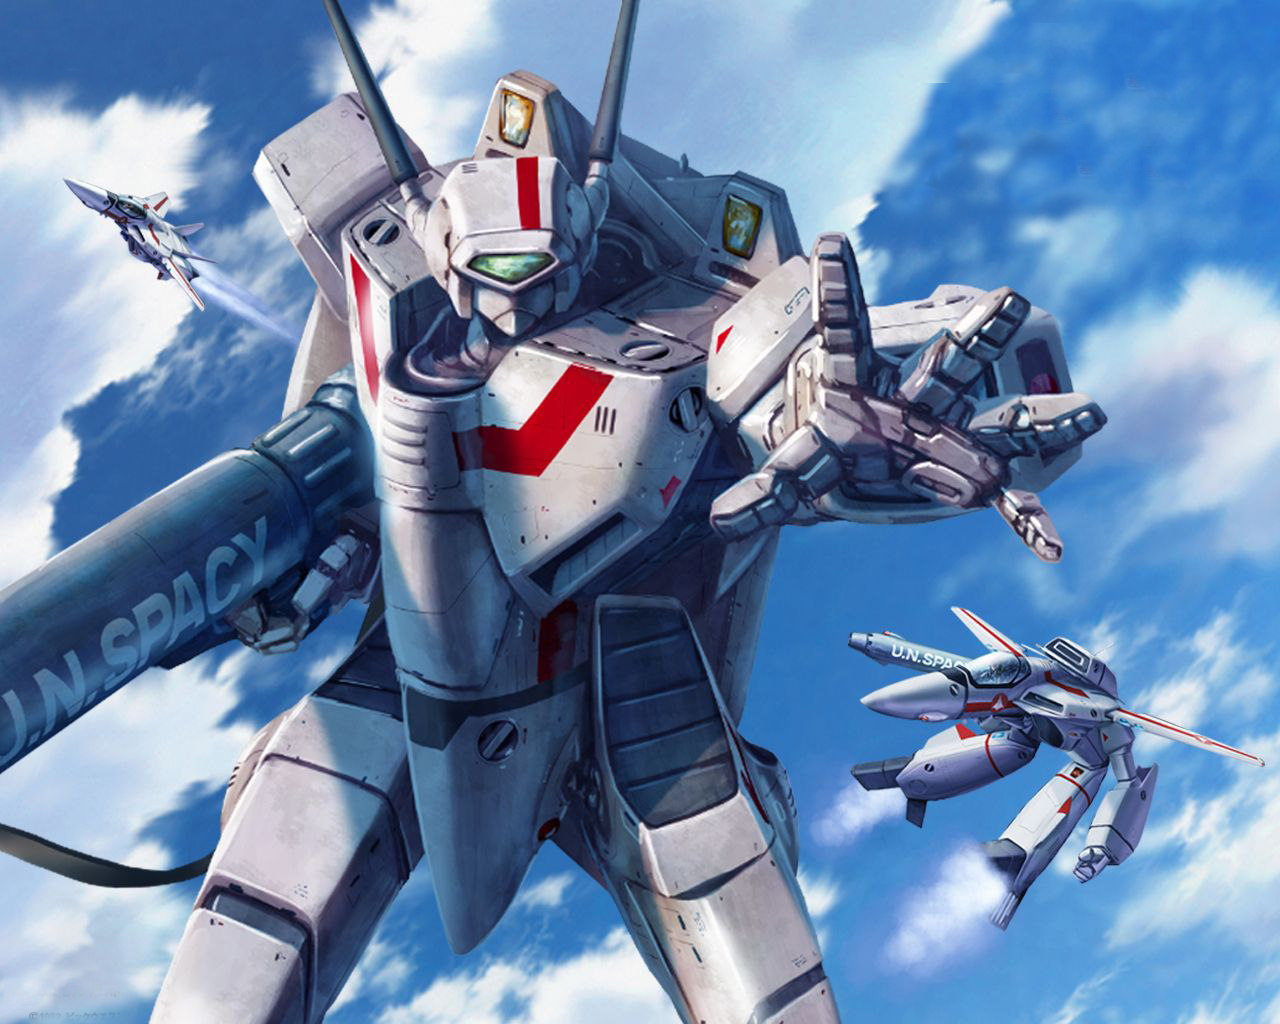 The VF-1 Valkyrie: in praise of a truly iconic mecha design - The Dark ...